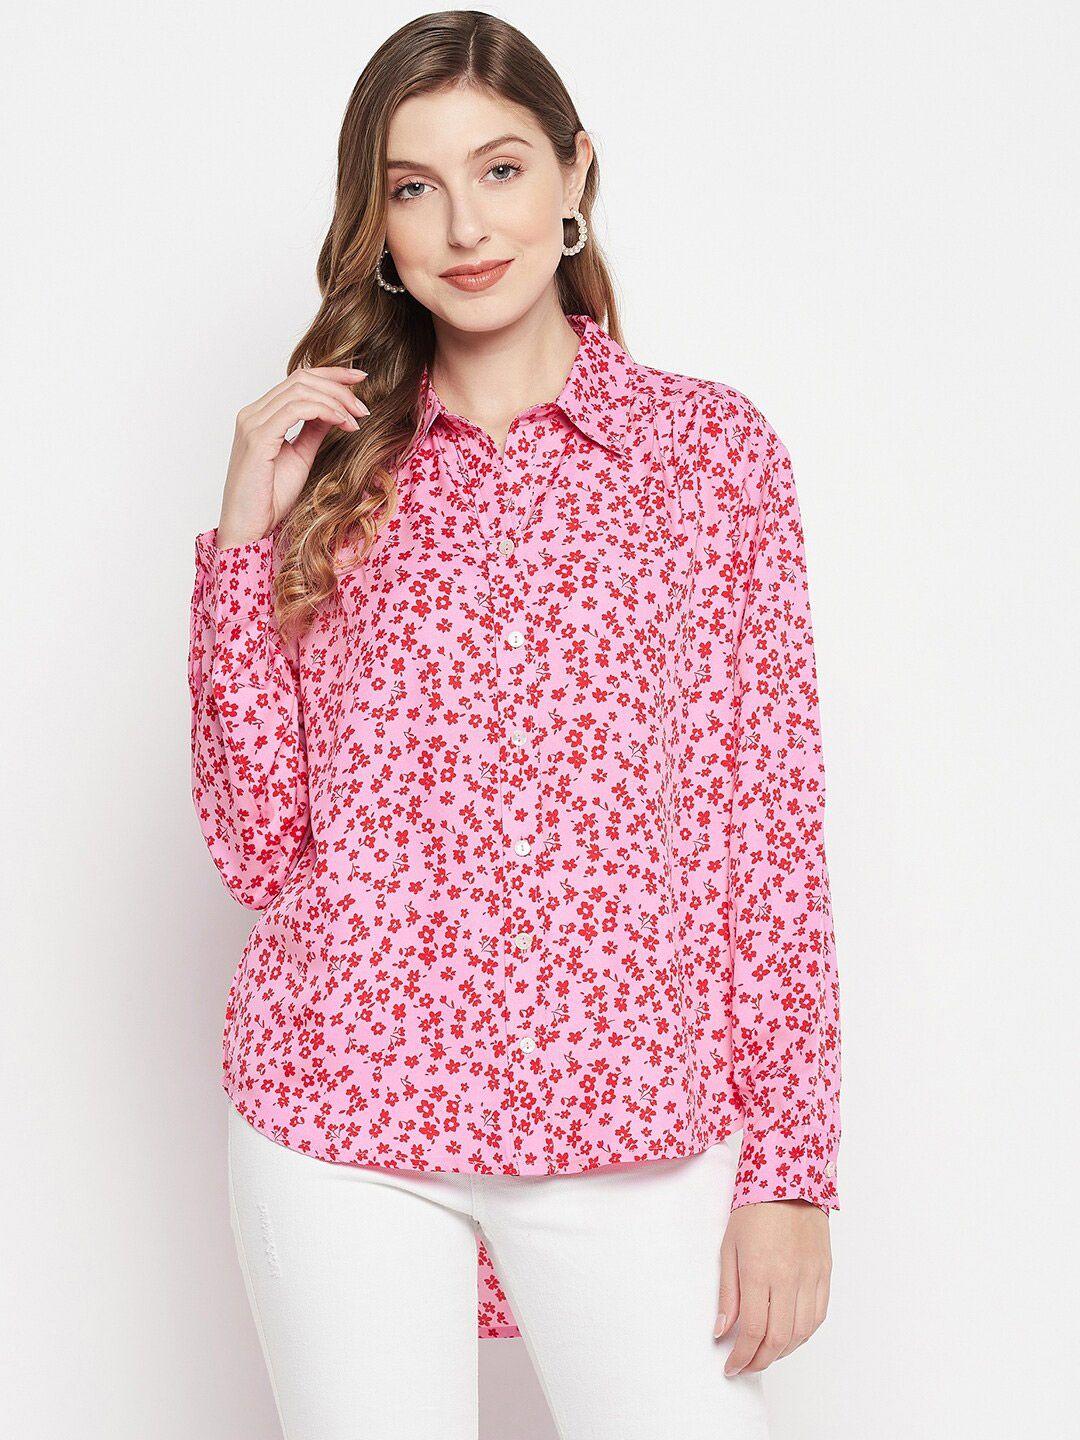 color cocktail women floral printed casual shirt